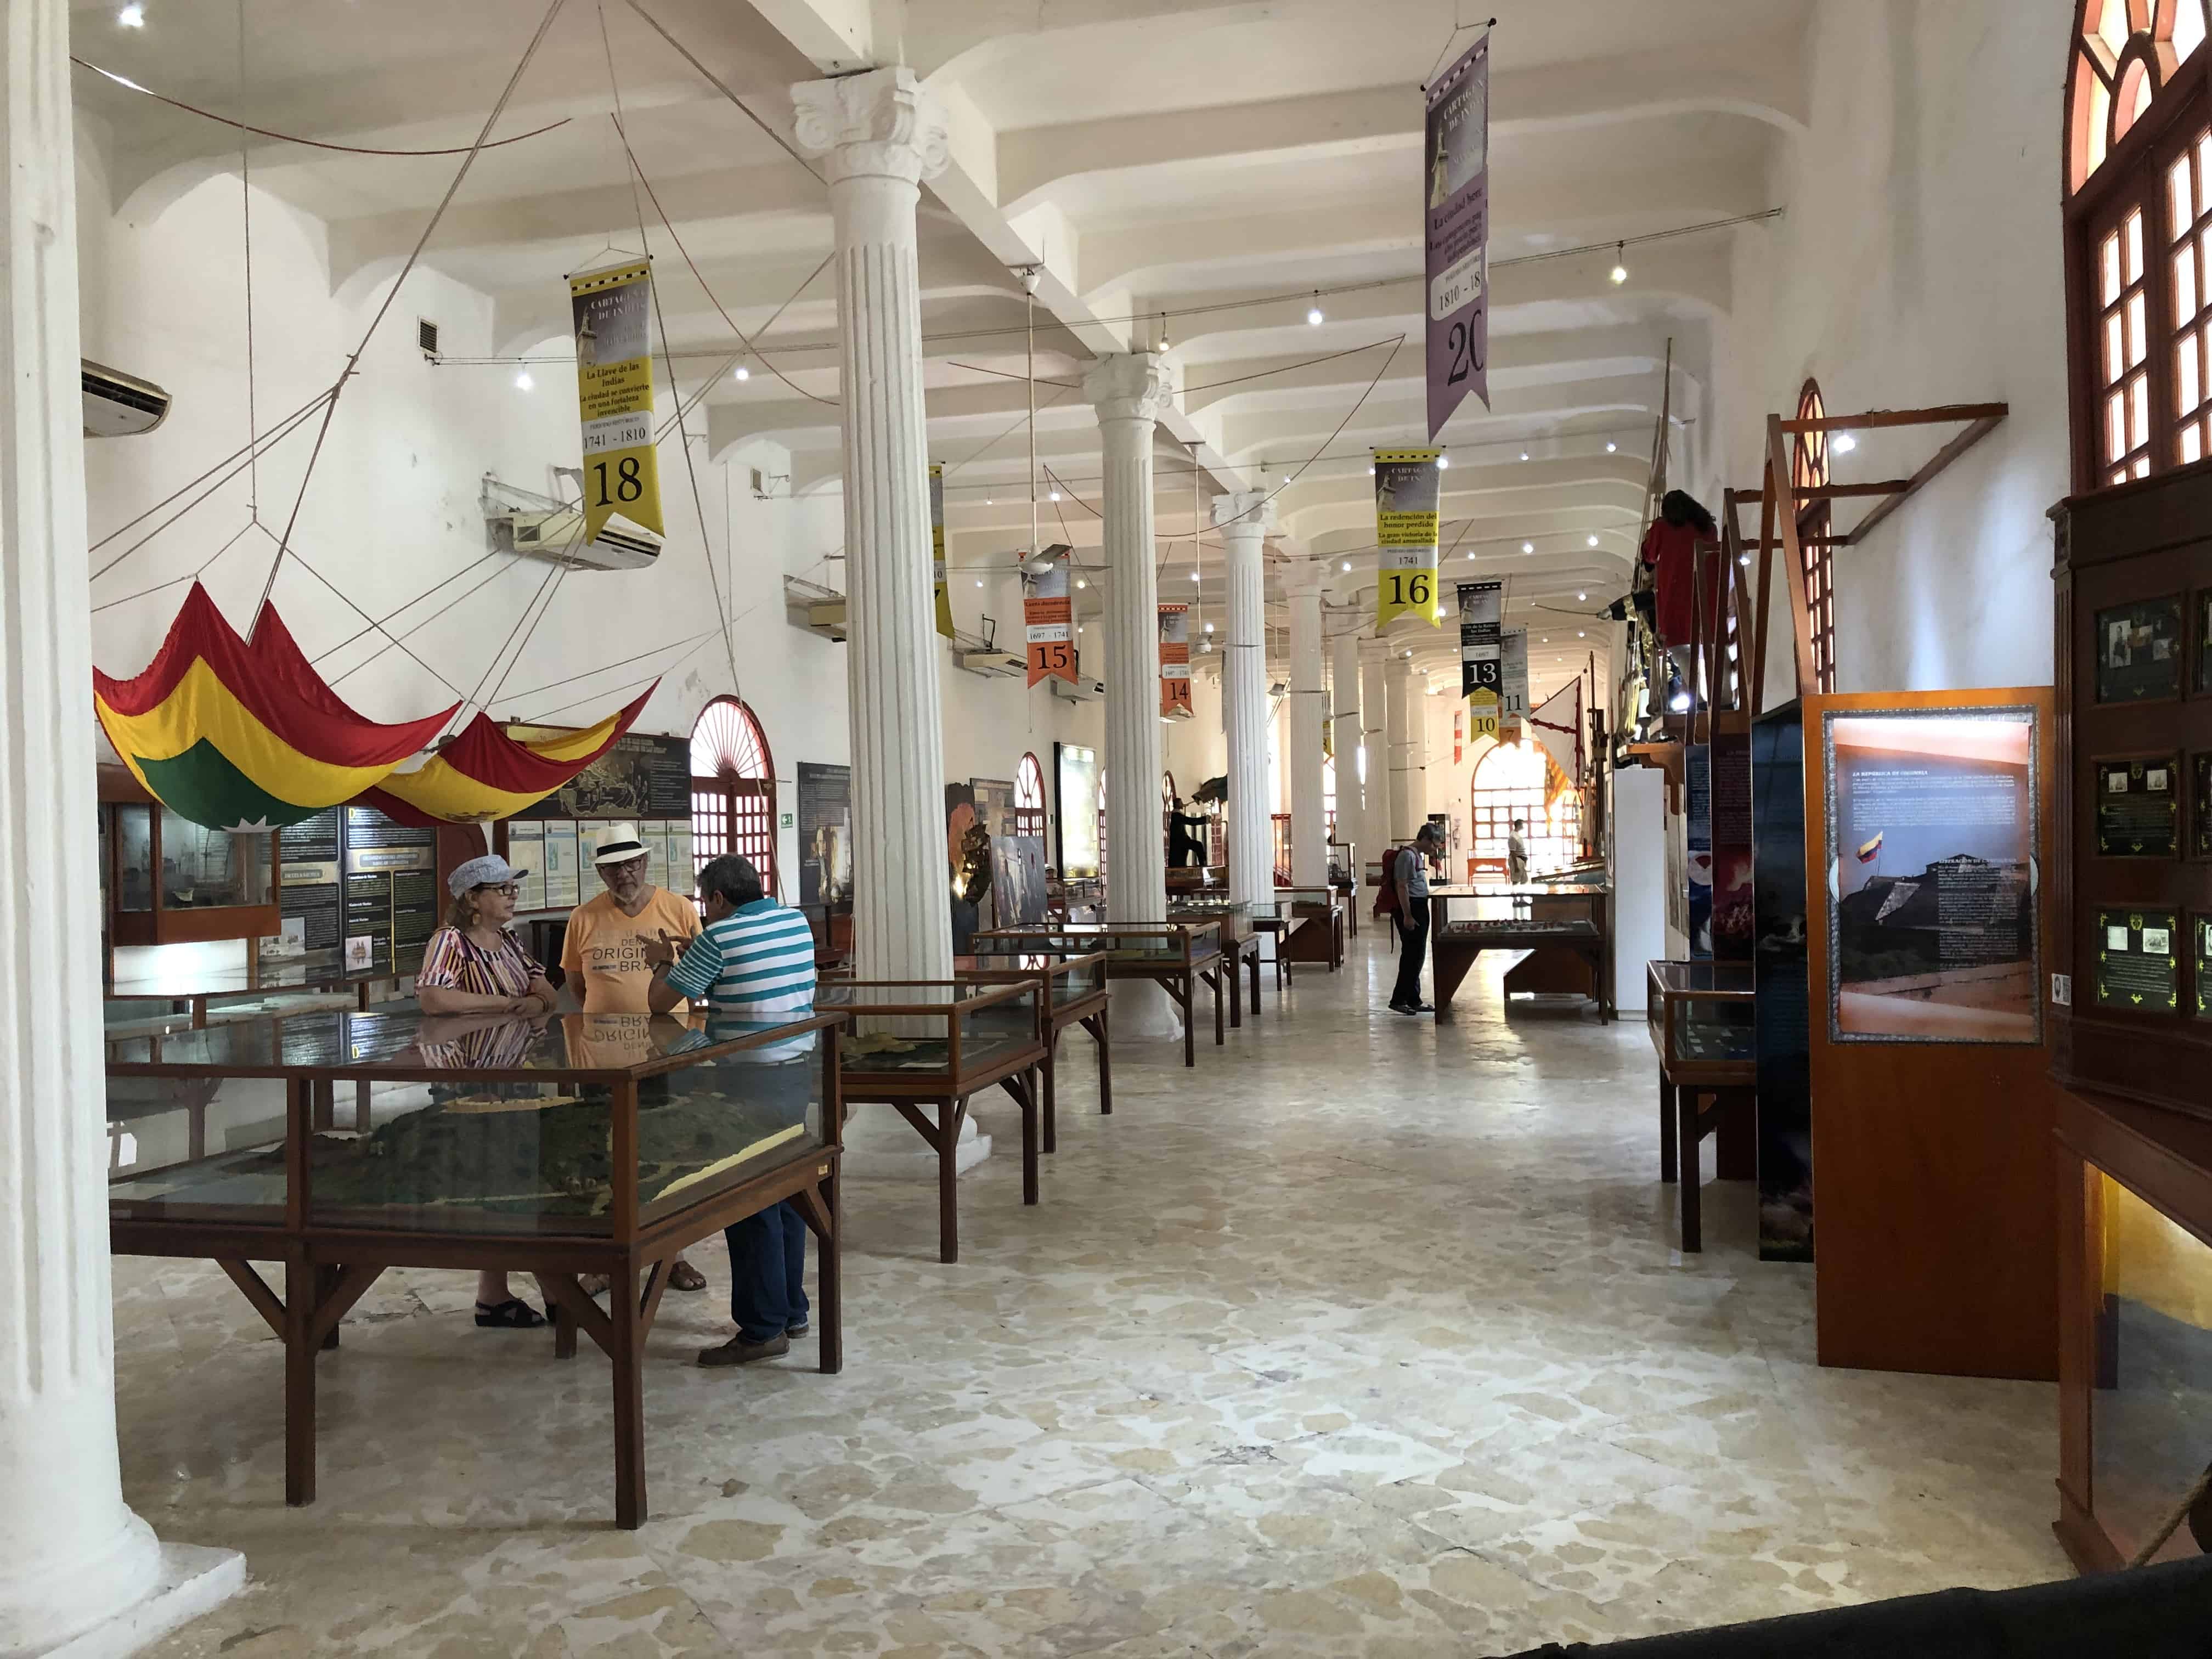 Ground floor at the Caribbean Naval Museum in Cartagena, Colombia